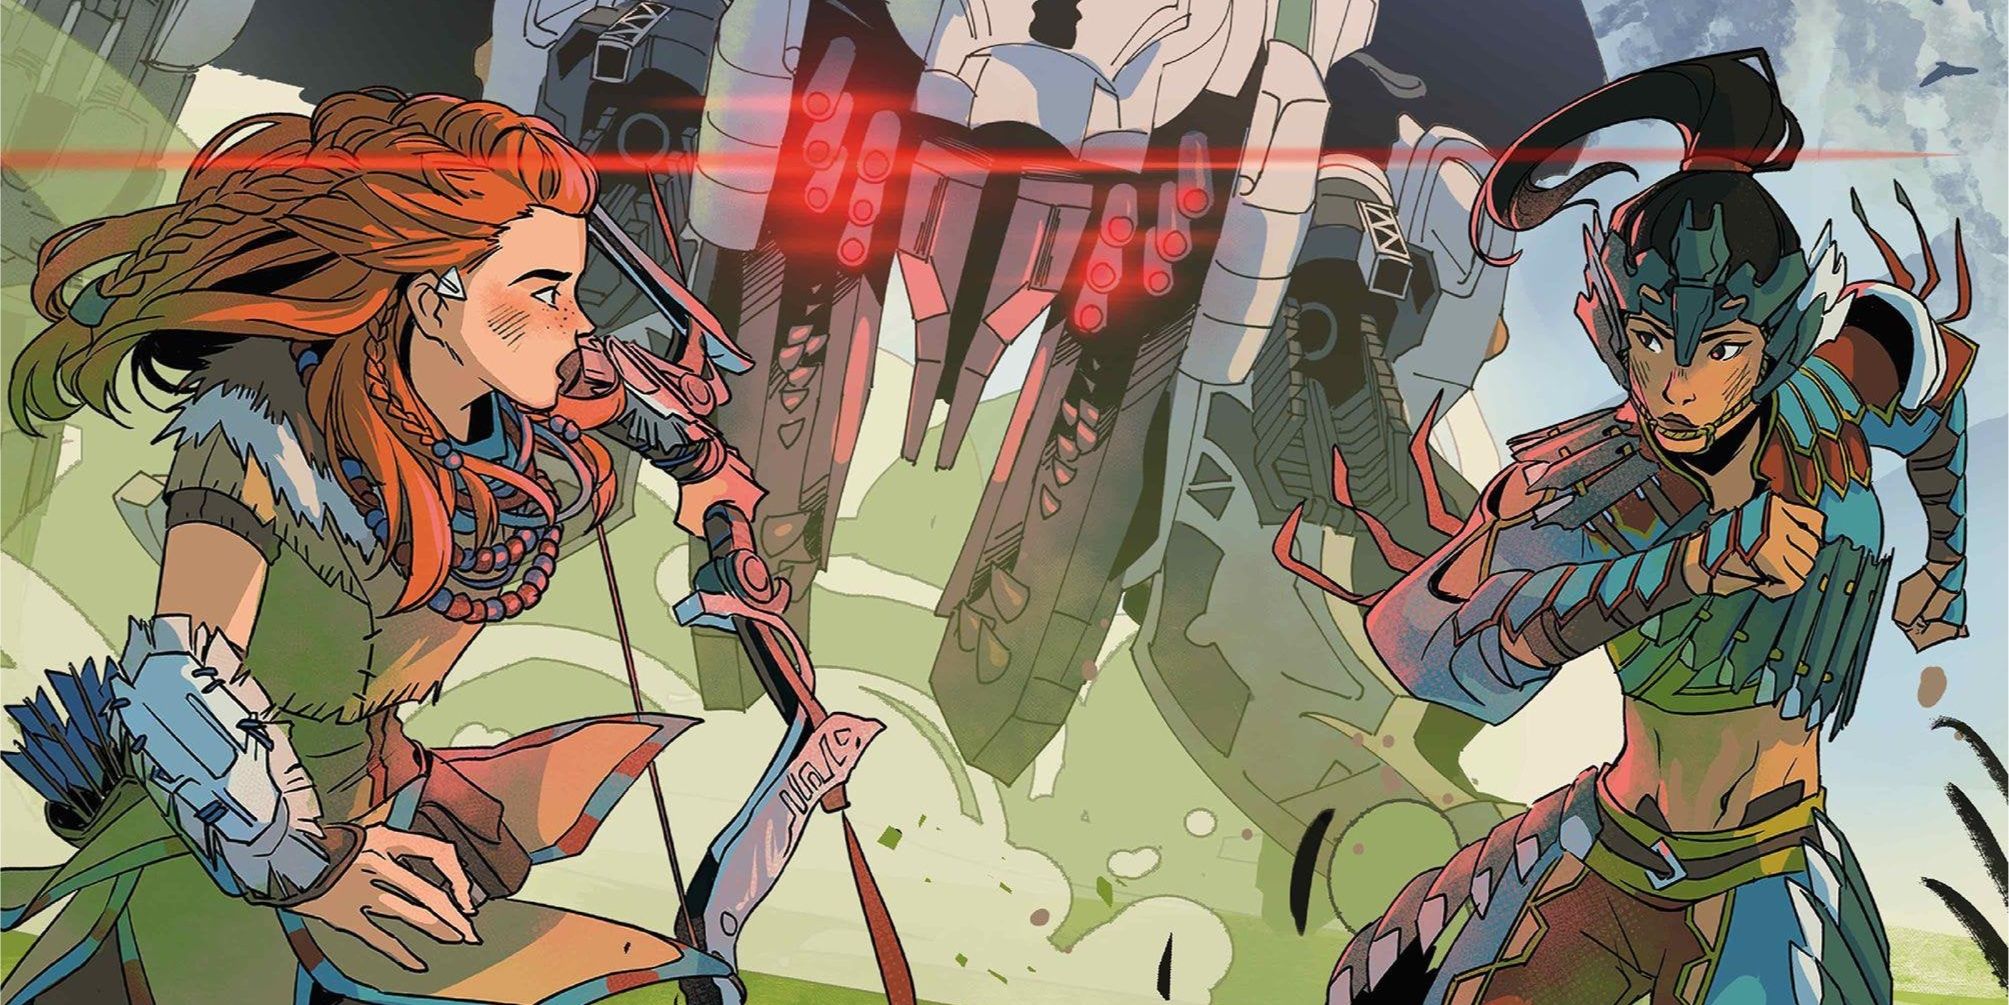 Review: Horizon Zero Dawn #1 – A Great Holdover Until The New Game